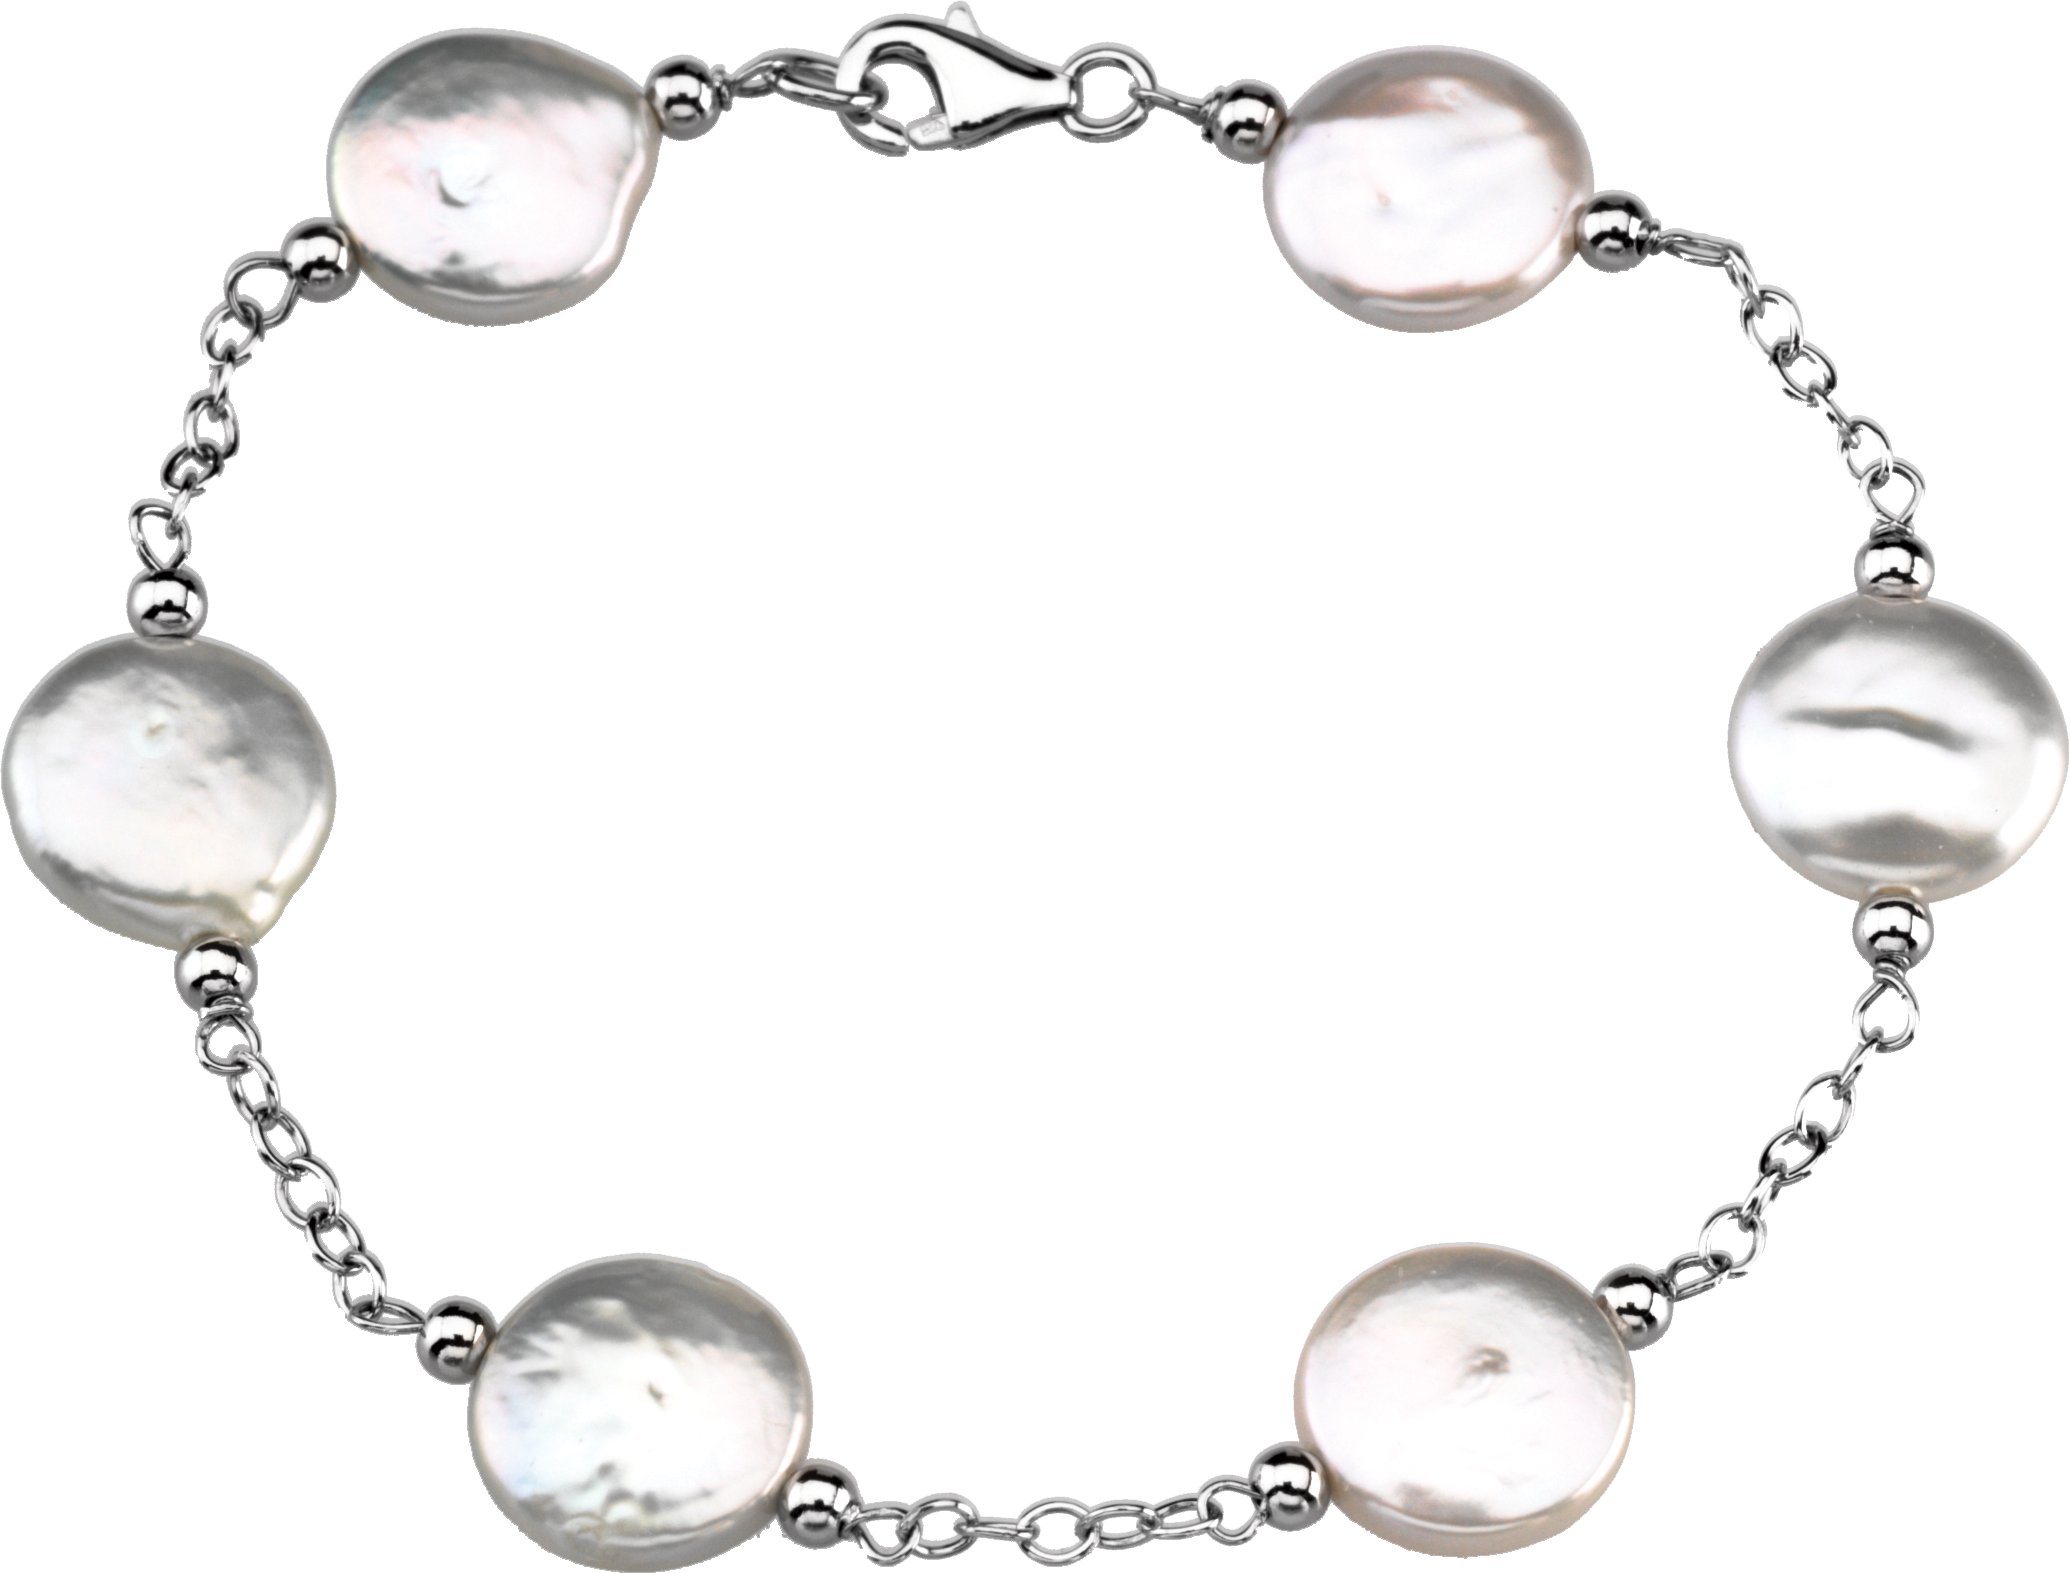 Sterling Silver 12 13 mm Freshwater Cultured White Coin Pearl Station 7.5 inch Bracelet Ref. 2396499